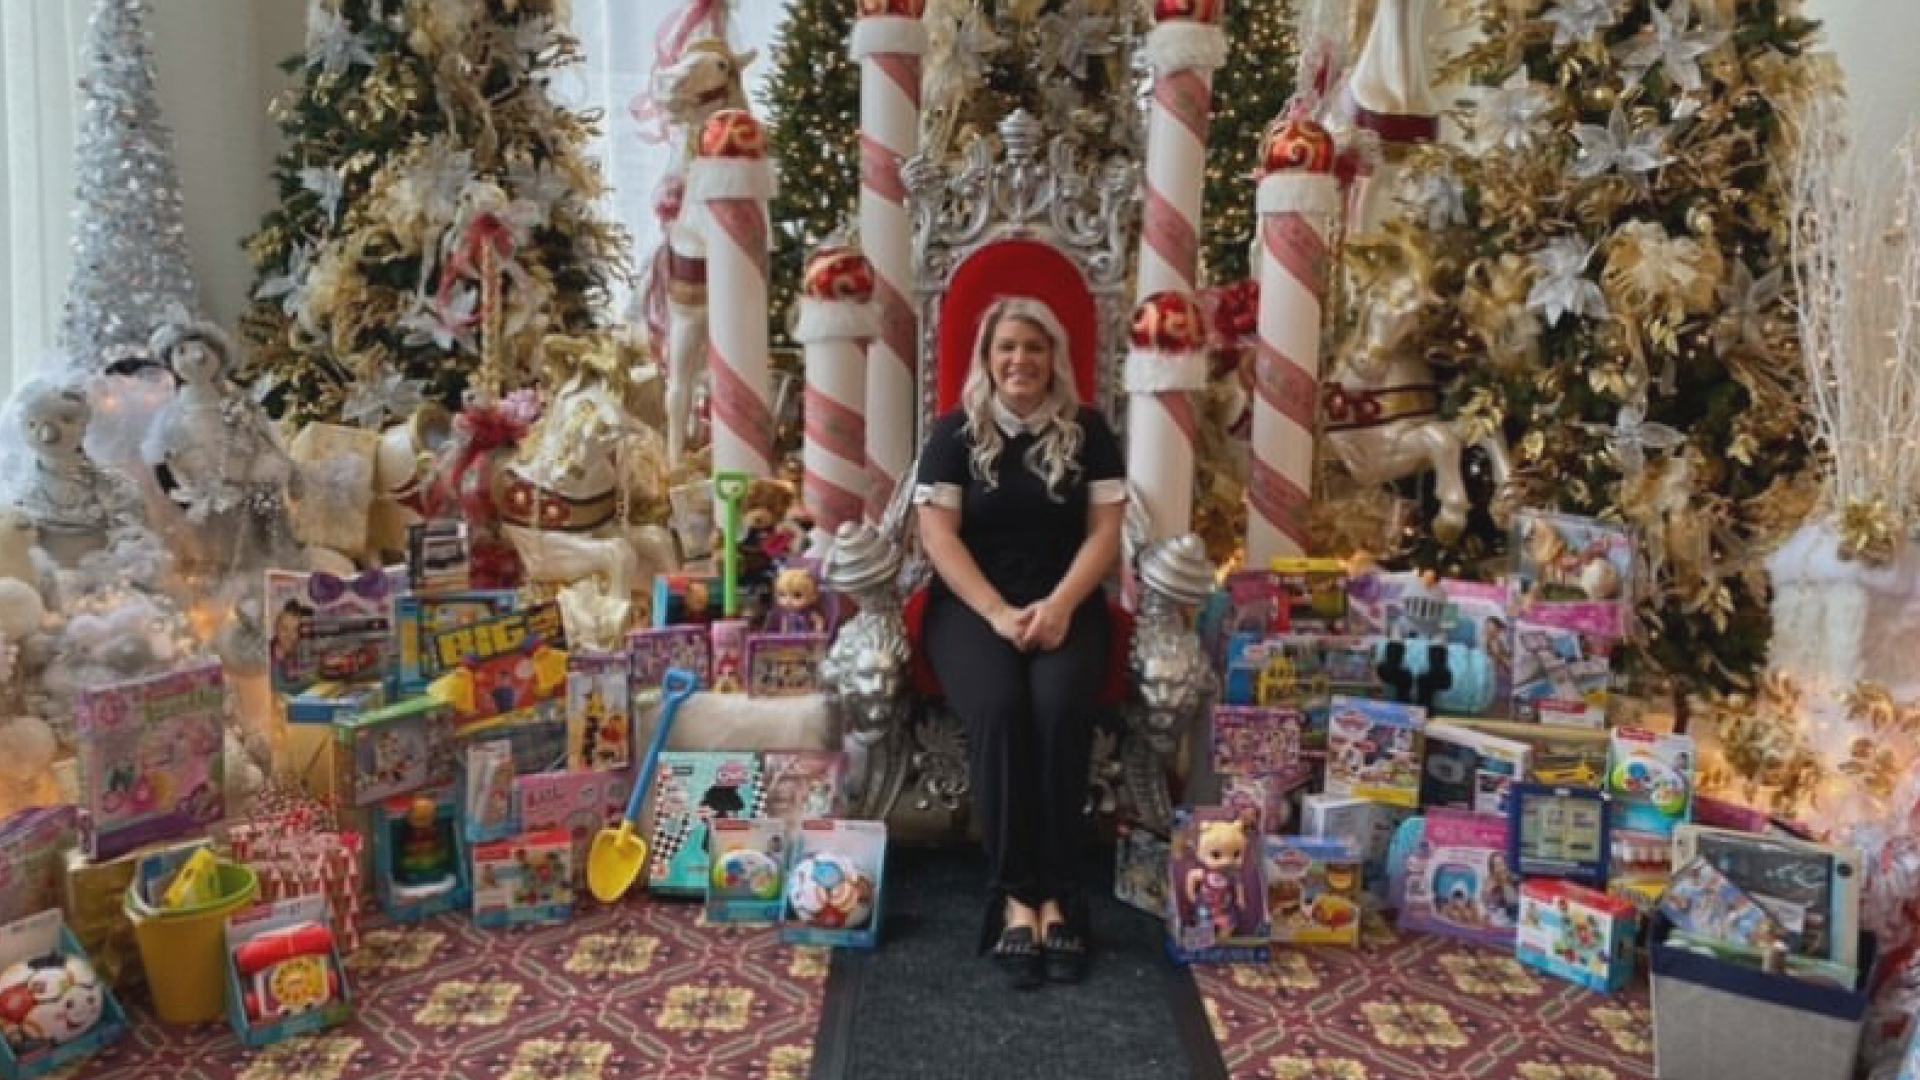 Kate Tolley Gerlach decided to honor her late father by giving gits to those in need during the holidays.